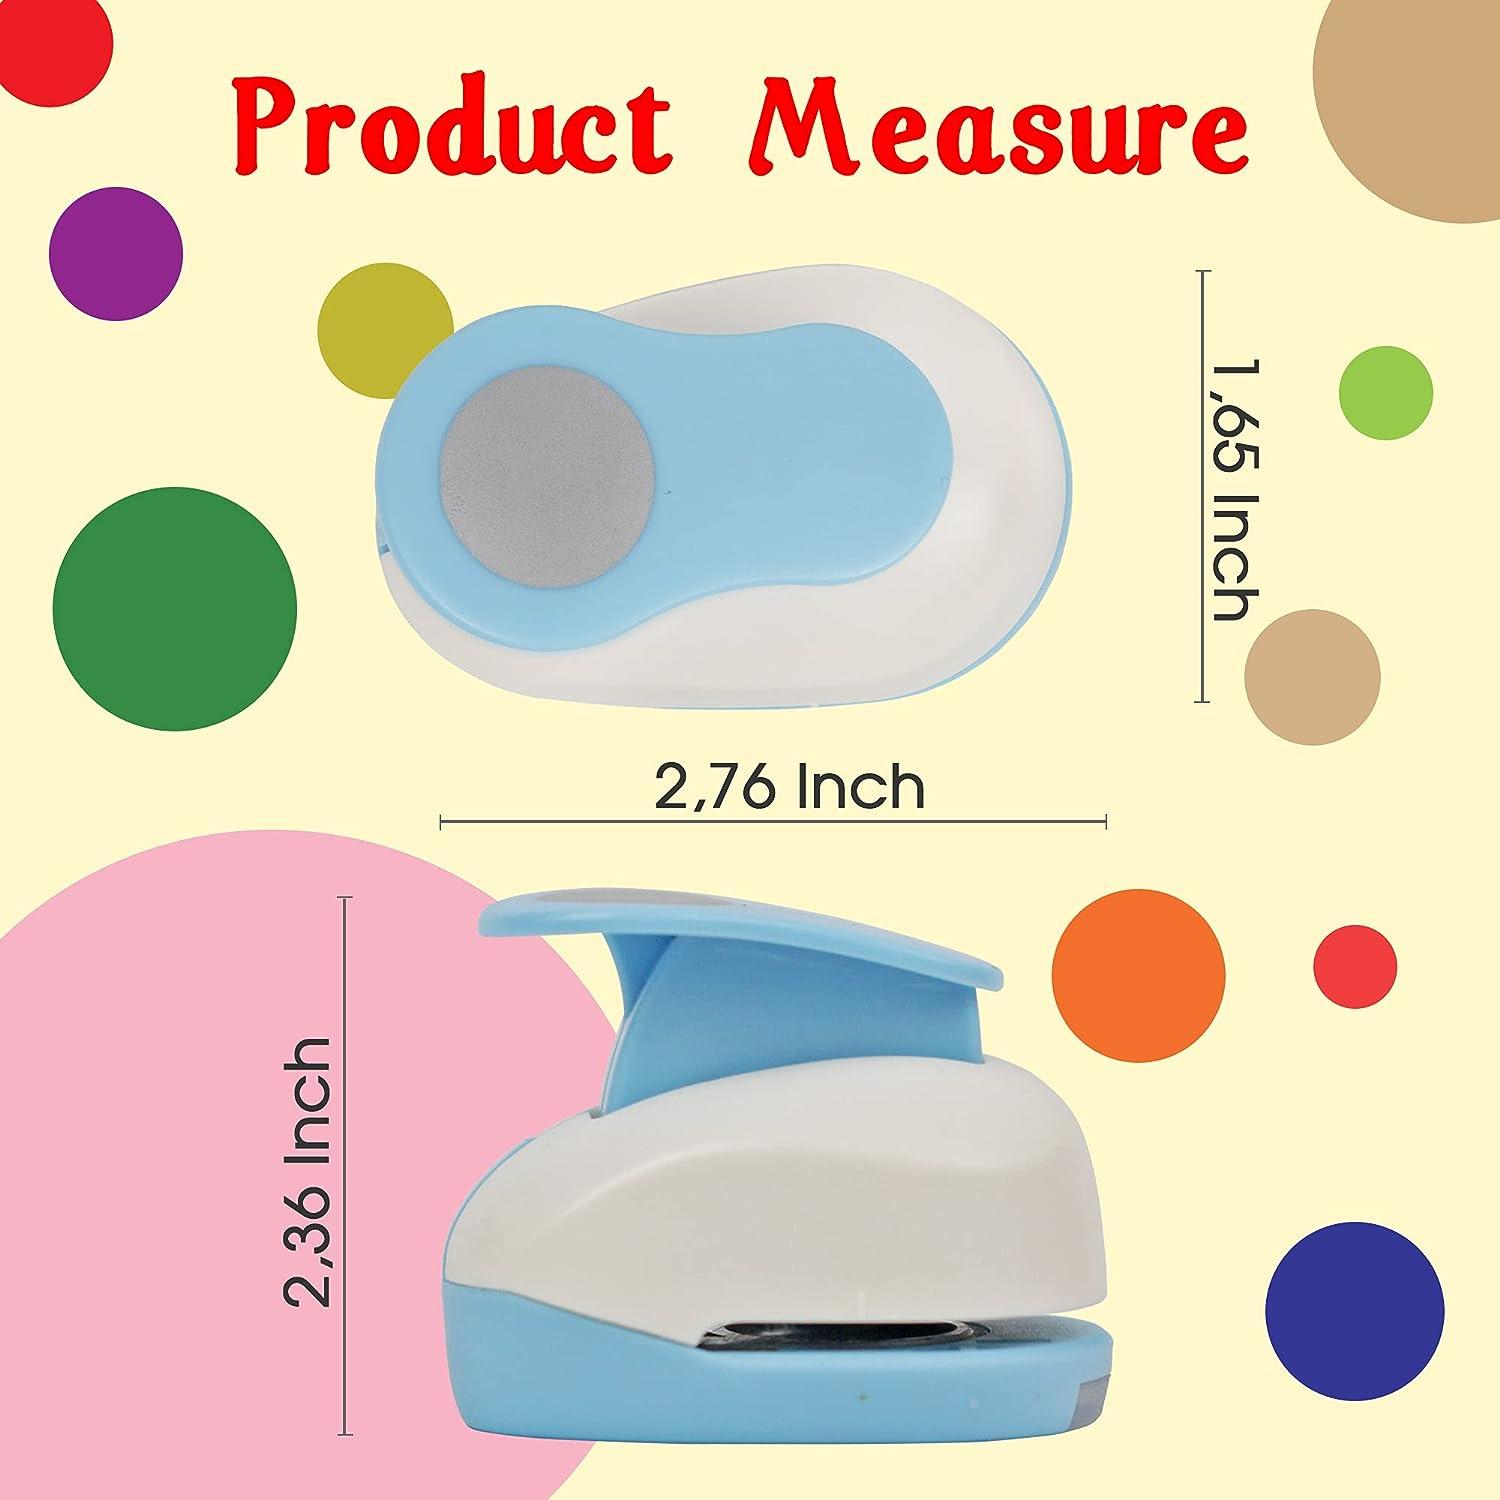 2 Inch Paper Punch, Circle Paper Punch, DIY Handmade Craft Punch Shape Circle  Punch Great for Crafting Scrapbooking Cards 